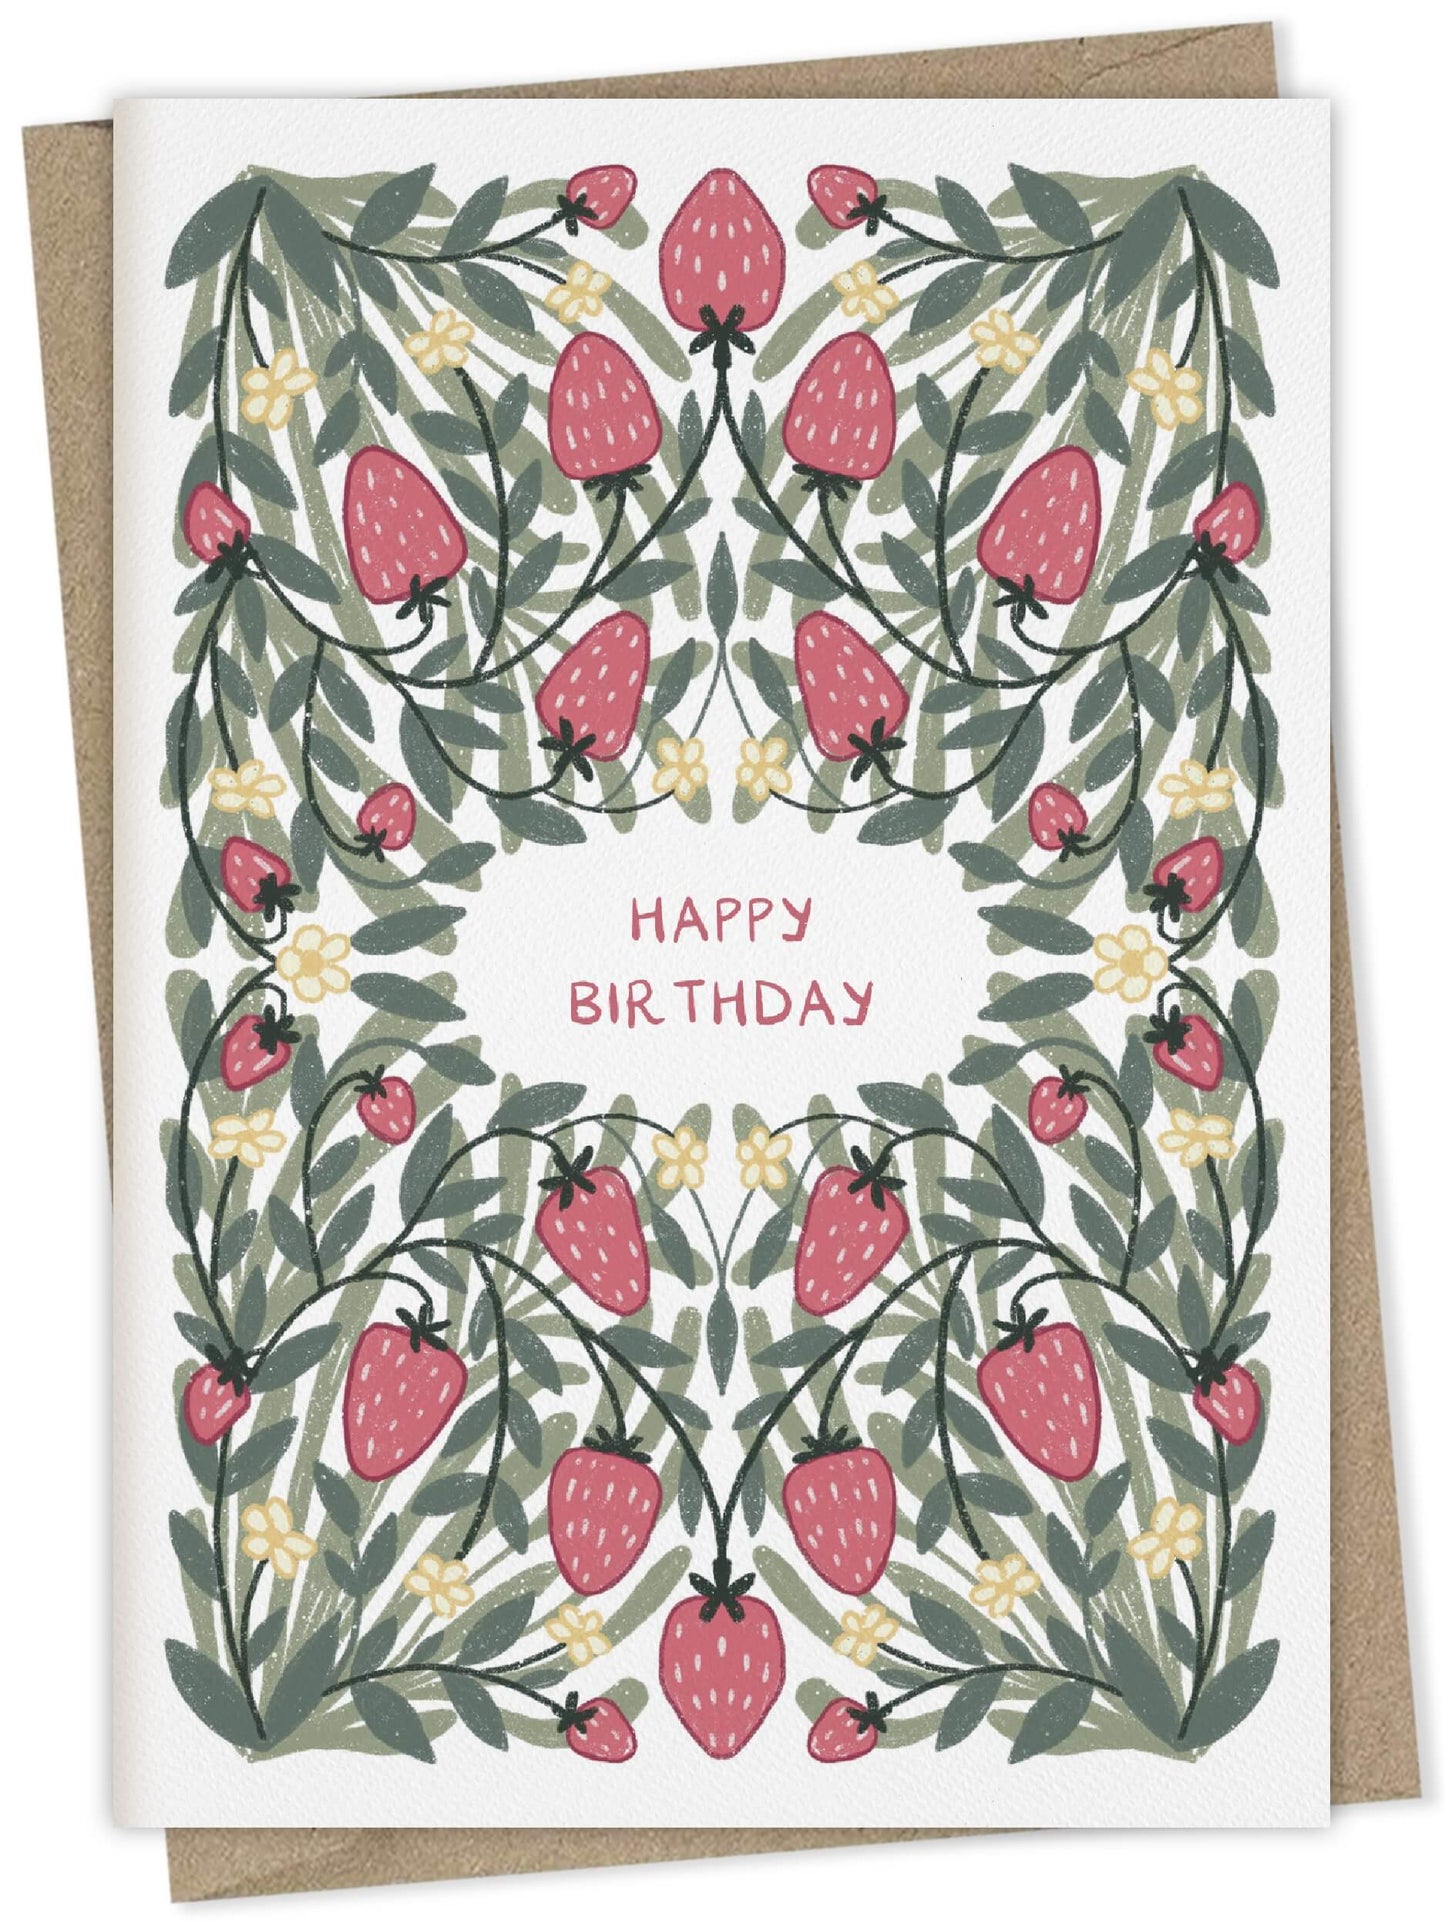 Happy birthday with strawberry pattern – floral greeting card